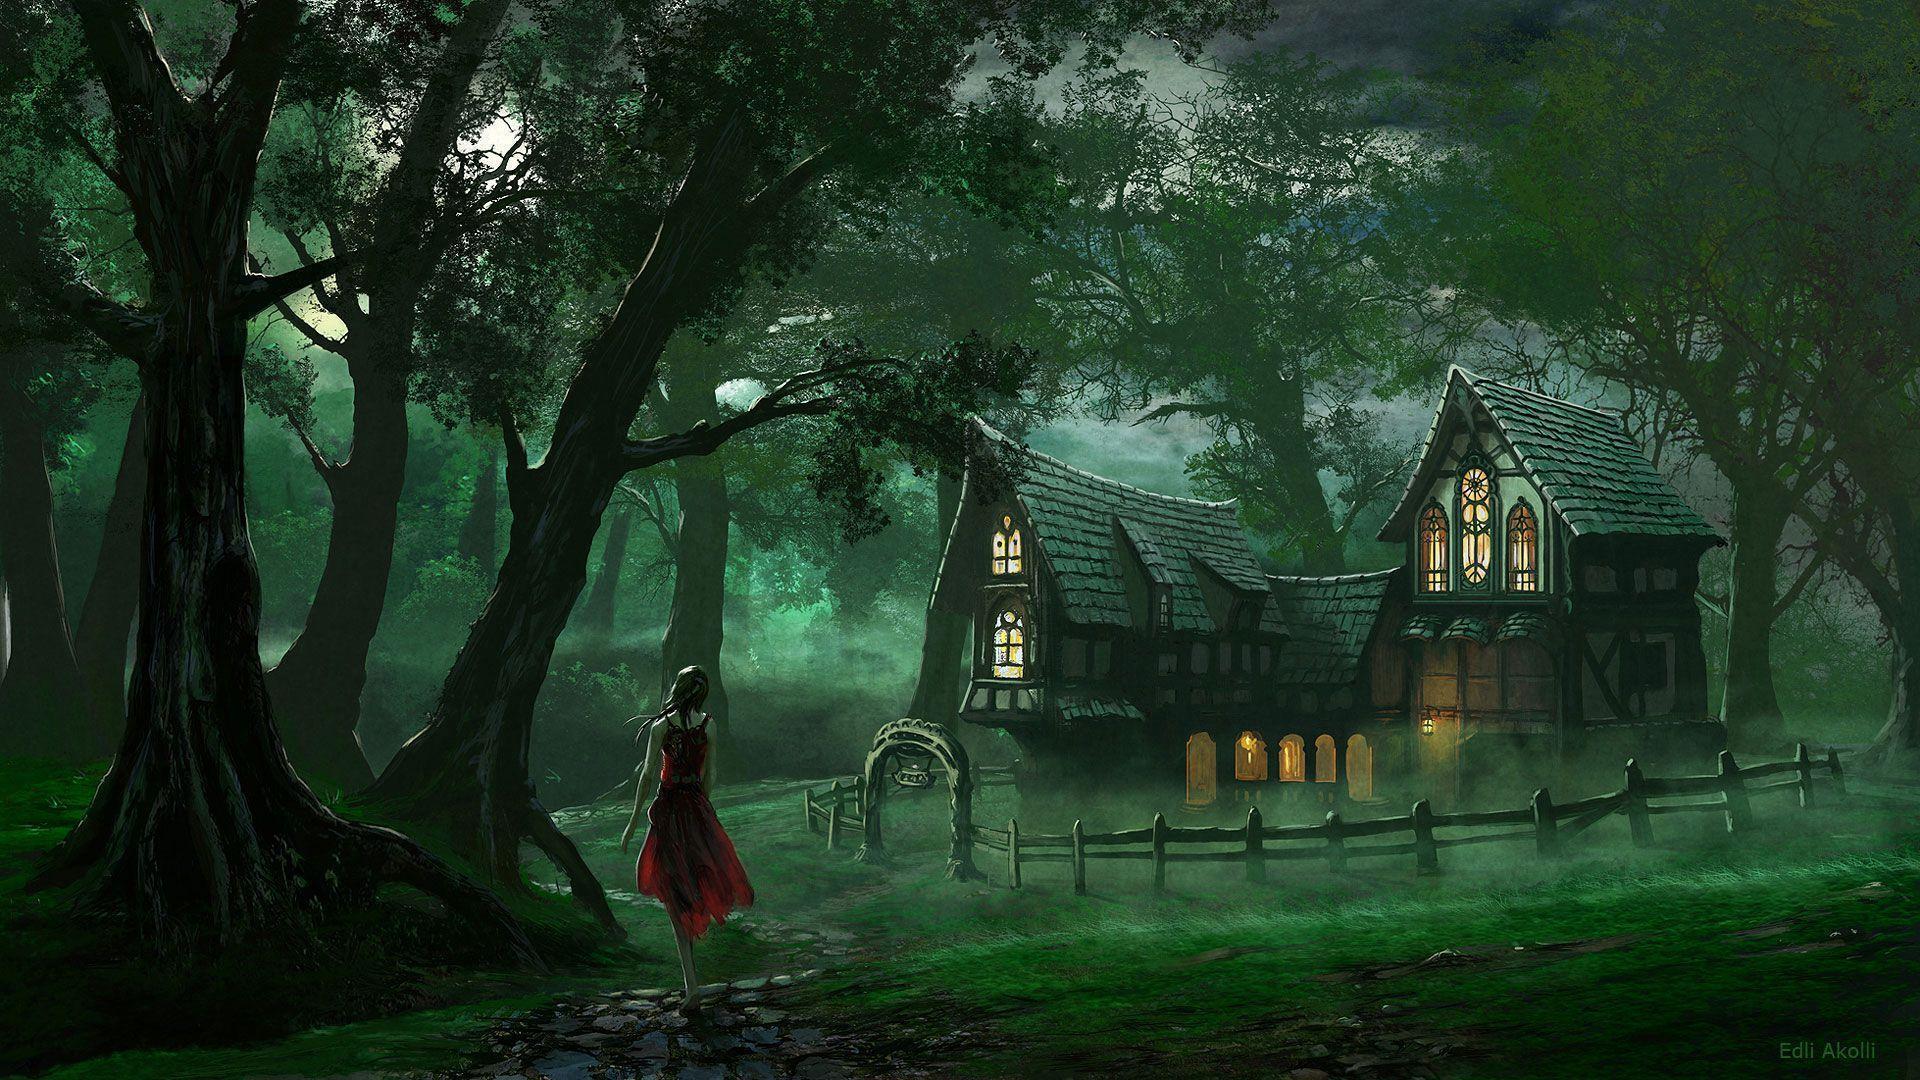 Free Wallpaper and Inn in Deep Forest 1920x1080 wallpaper